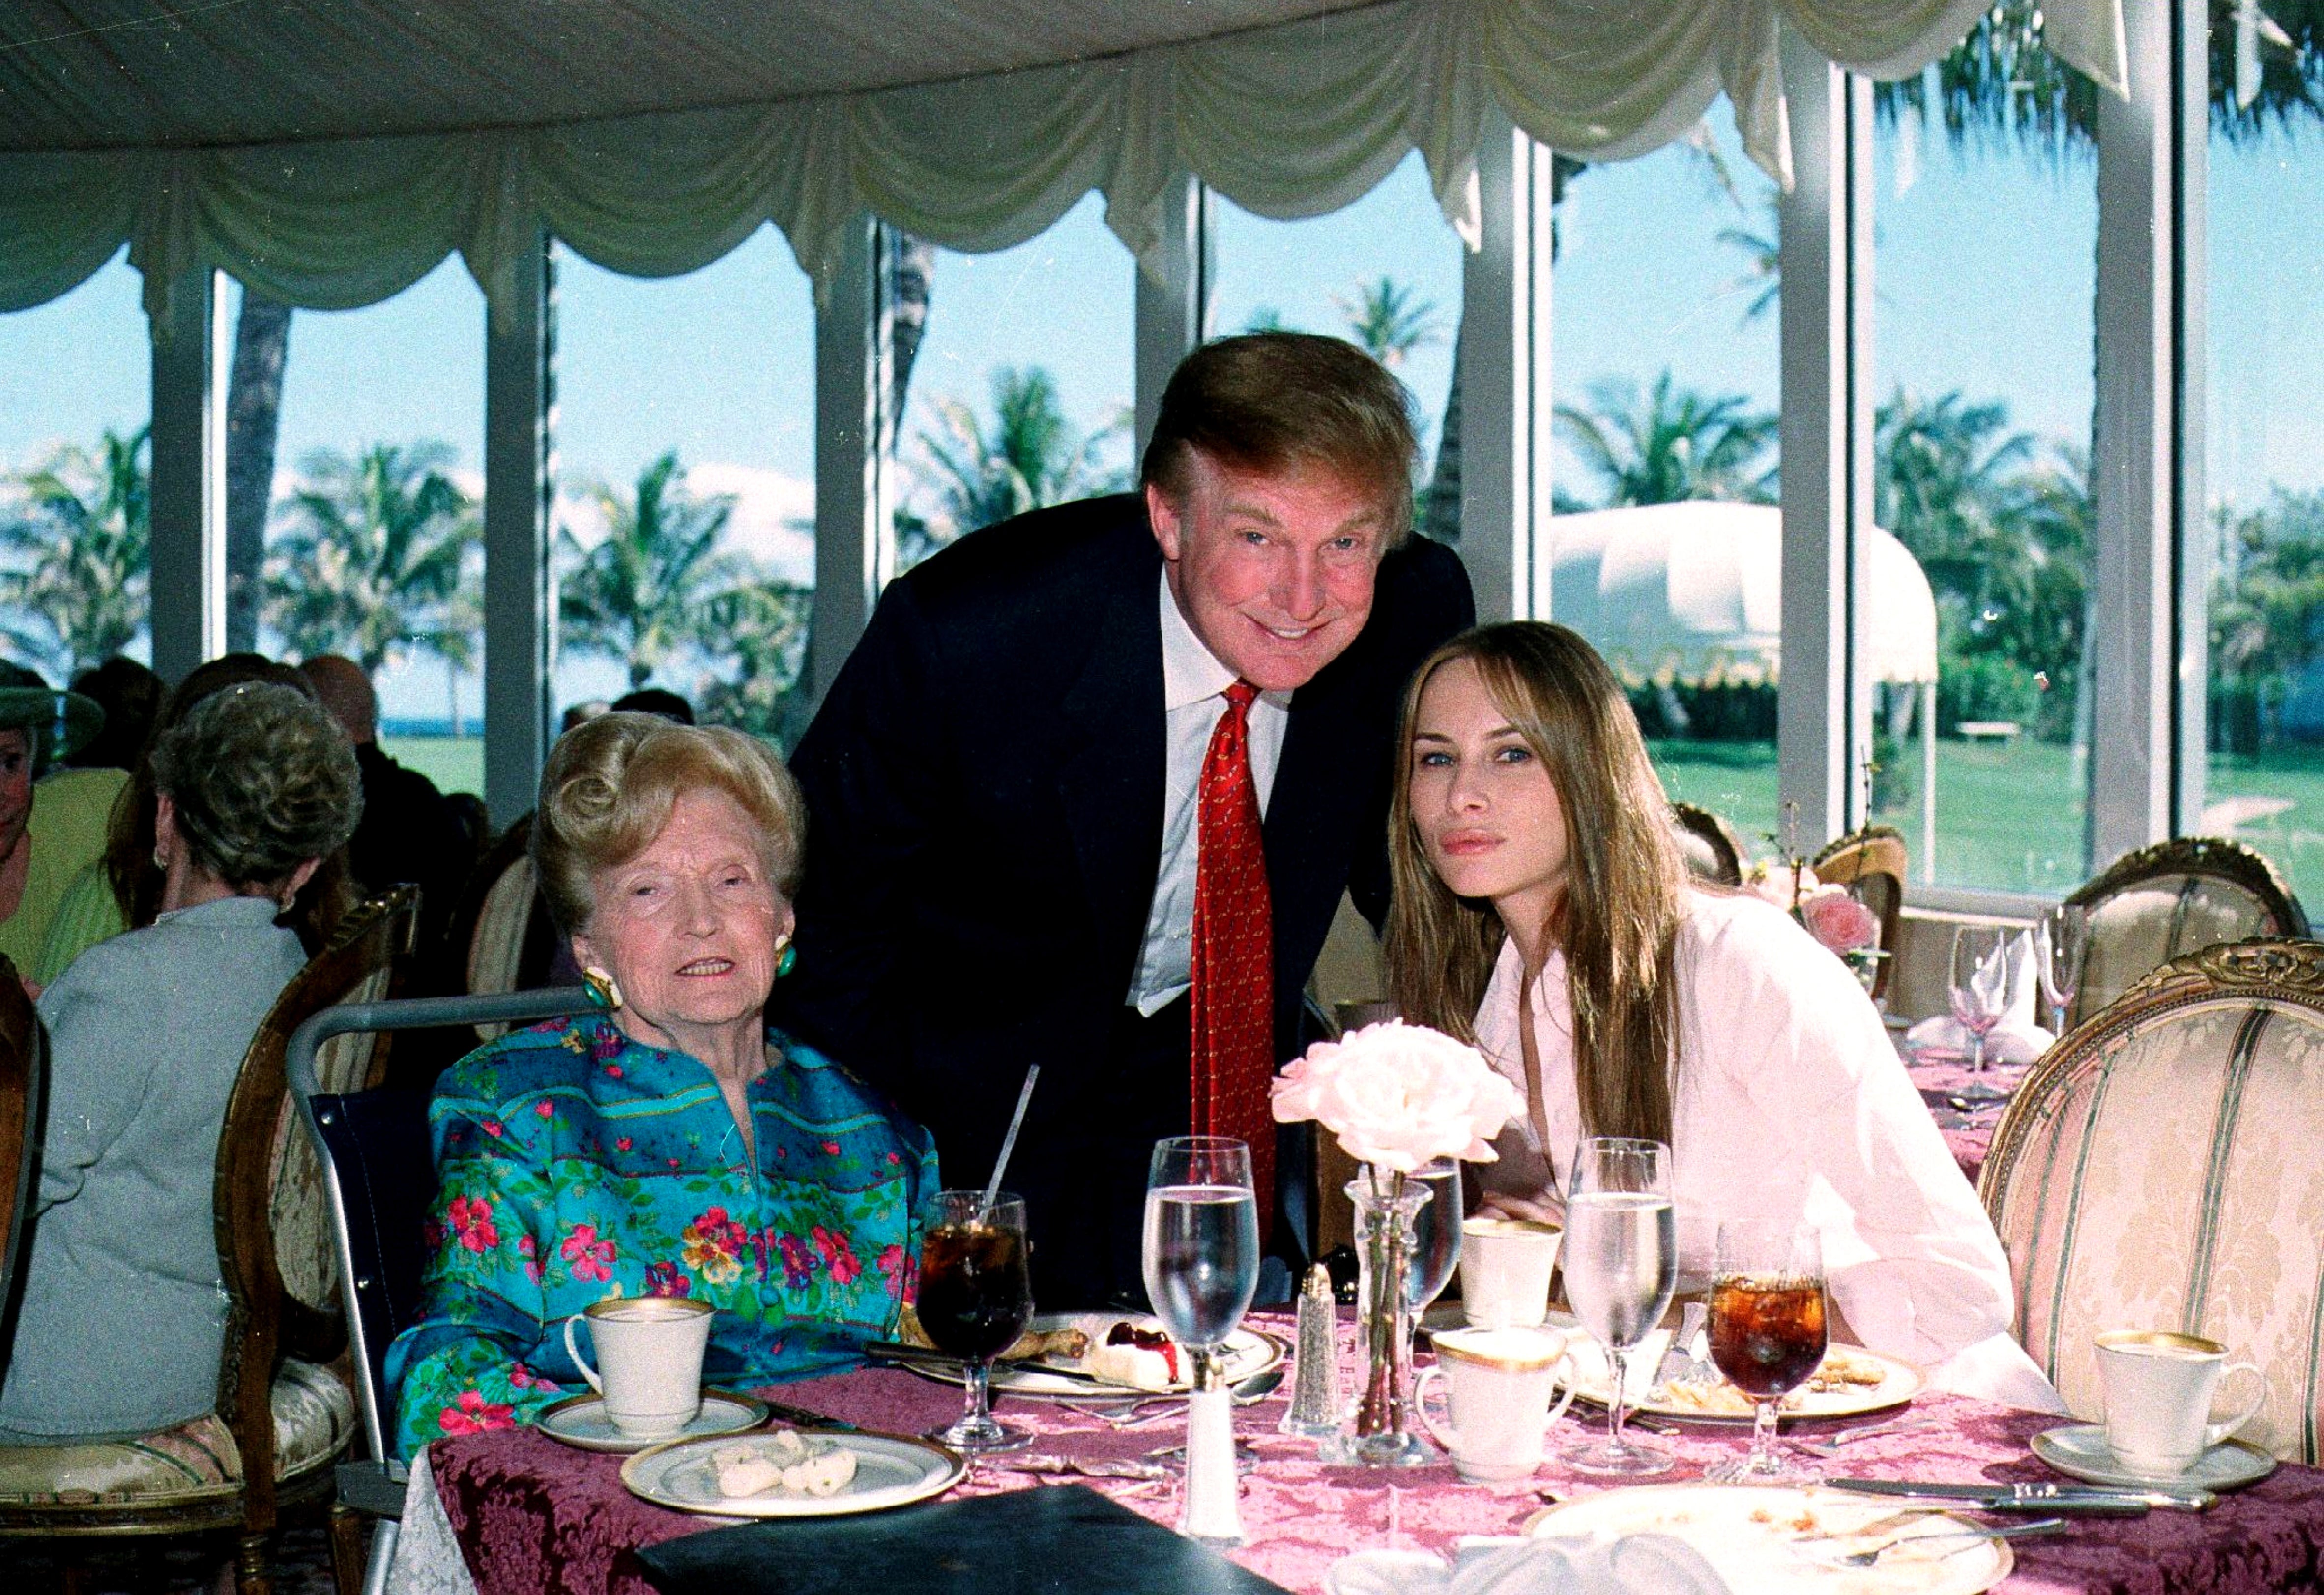 From left, American socialite Mary Trump, her son, Donald, and his girlfriend (and future wife), former model Melania Knauss, pictured at Mar-a-Lago in 2000